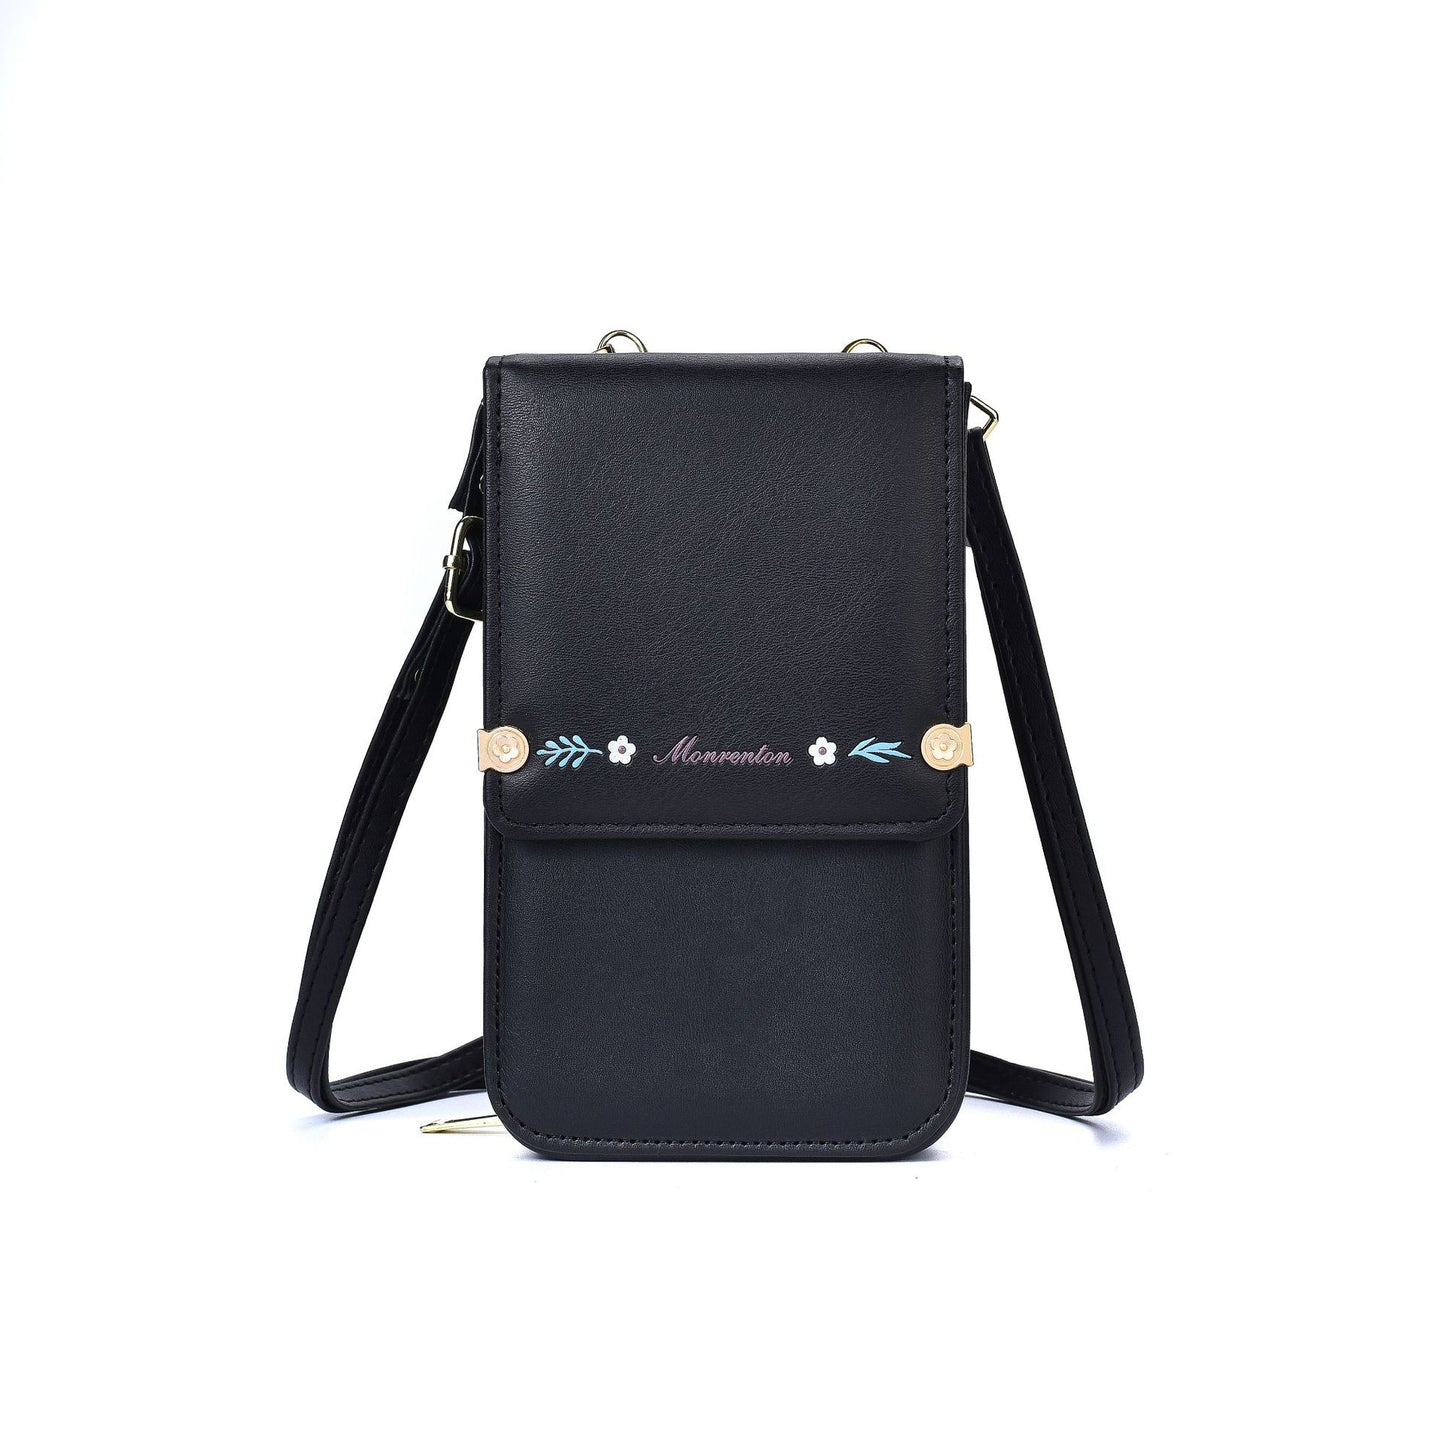 Flowers Embroidery Mobile Phone Bag black color 